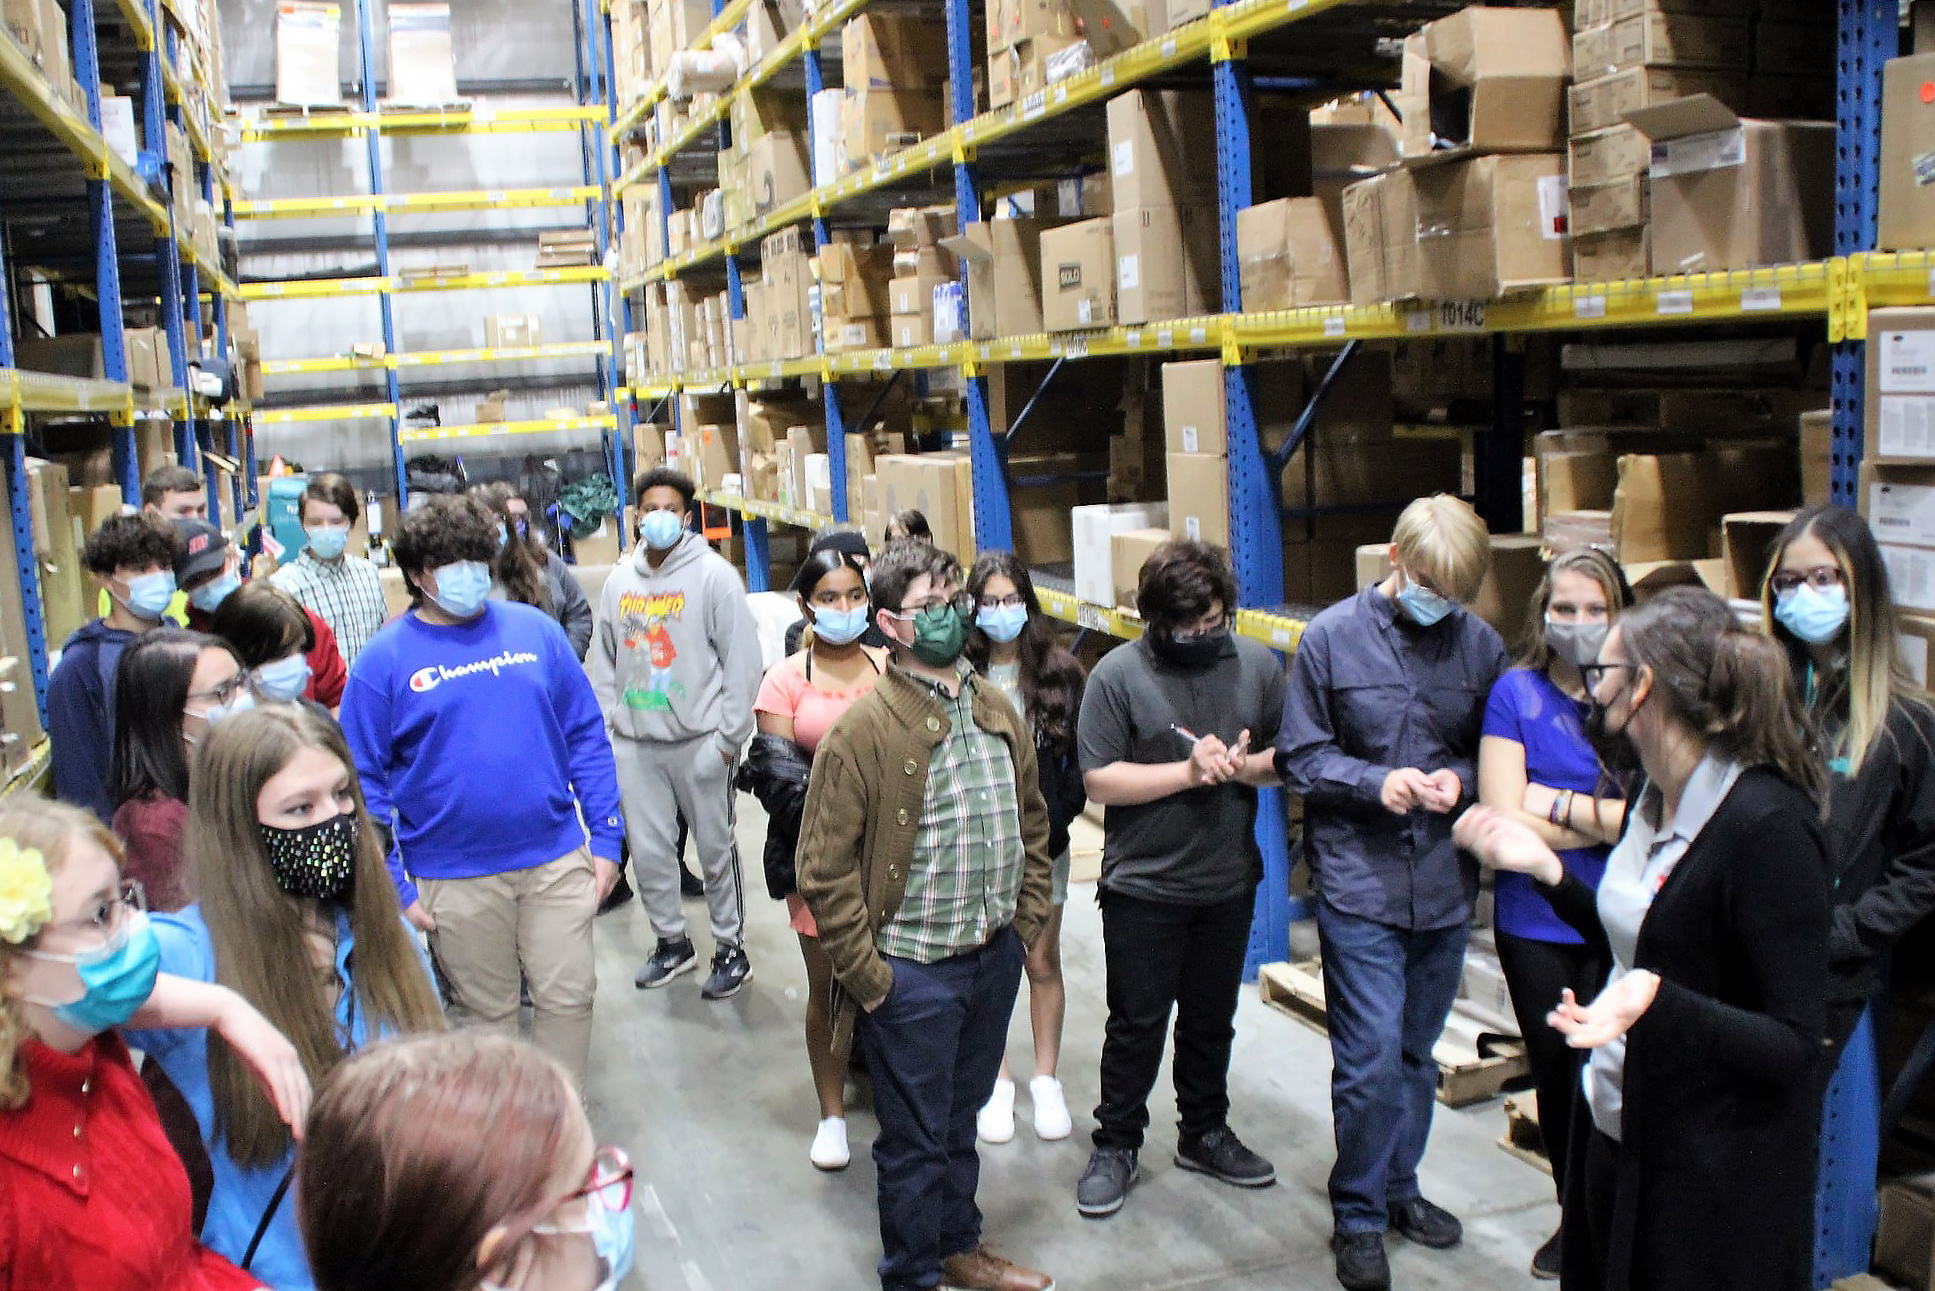 A group of students listens to a employee as they walk through the stacks of a warehouse